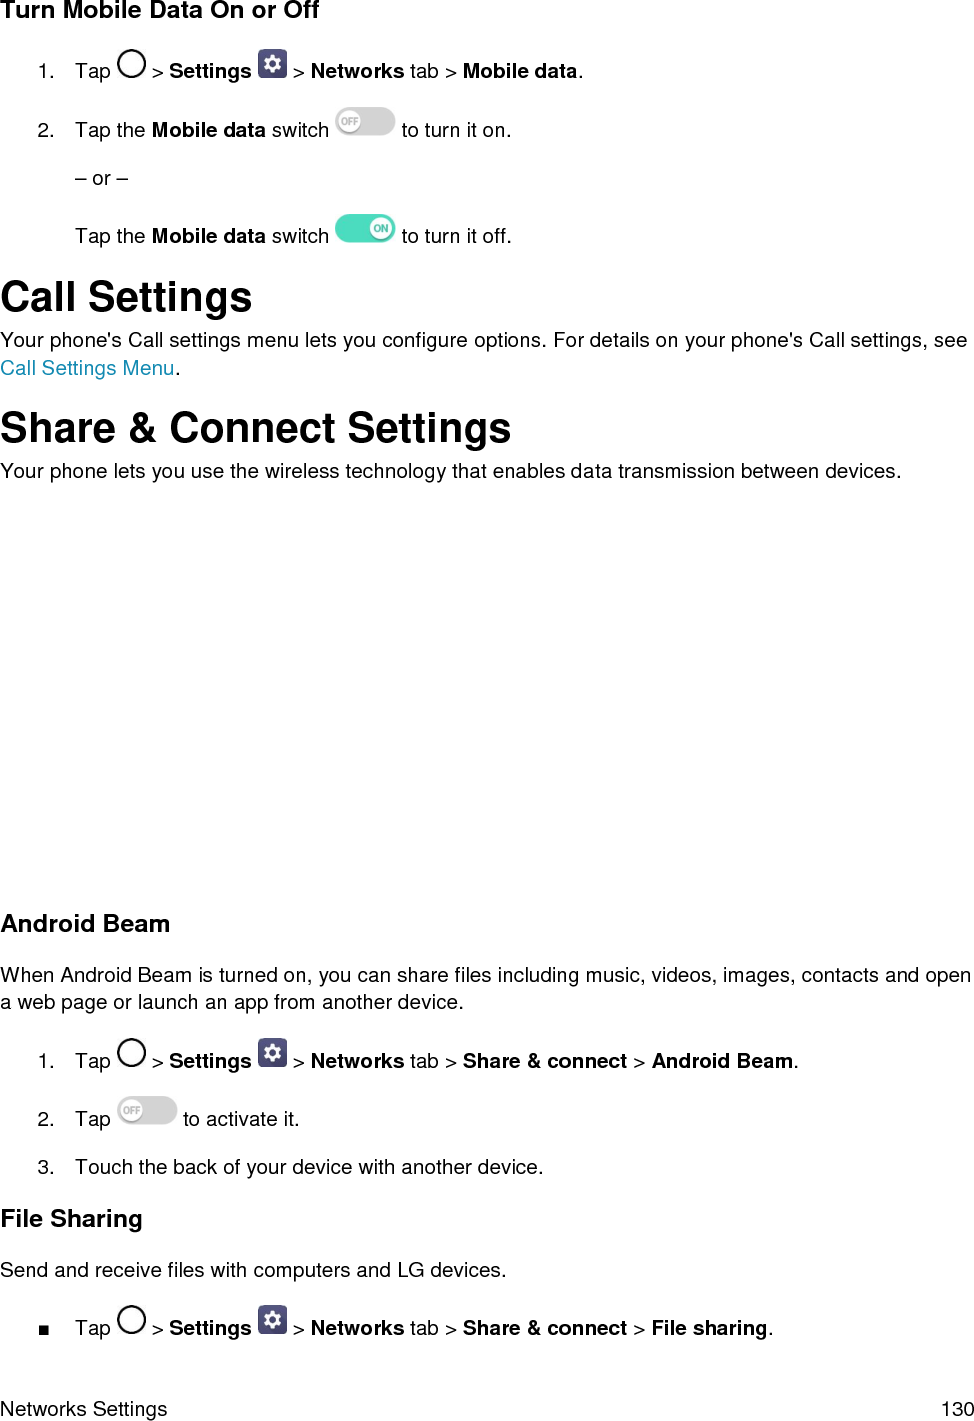 Networks Settings  130 Turn Mobile Data On or Off 1. Tap  &gt; Settings   &gt; Networks tab &gt; Mobile data. 2. Tap the Mobile data switch  to turn it on. –or –Tap the Mobile data switch   to turn it off. Call Settings Your phone&apos;s Call settings menu lets you configure options. For details on your phone&apos;s Call settings, see Call Settings Menu. Share &amp; Connect Settings Your phone lets you use the wireless technology that enables data transmission between devices. Android Beam When Android Beam is turned on, you can share files including music, videos, images, contacts and open a web page or launch an app from another device.  1. Tap  &gt; Settings   &gt; Networks tab &gt; Share &amp; connect &gt; Android Beam. 2. Tap  to activate it. 3. Touch the back of your device with another device.File Sharing Send and receive files with computers and LG devices. ■Tap  &gt; Settings   &gt; Networks tab &gt; Share &amp; connect &gt; File sharing. 